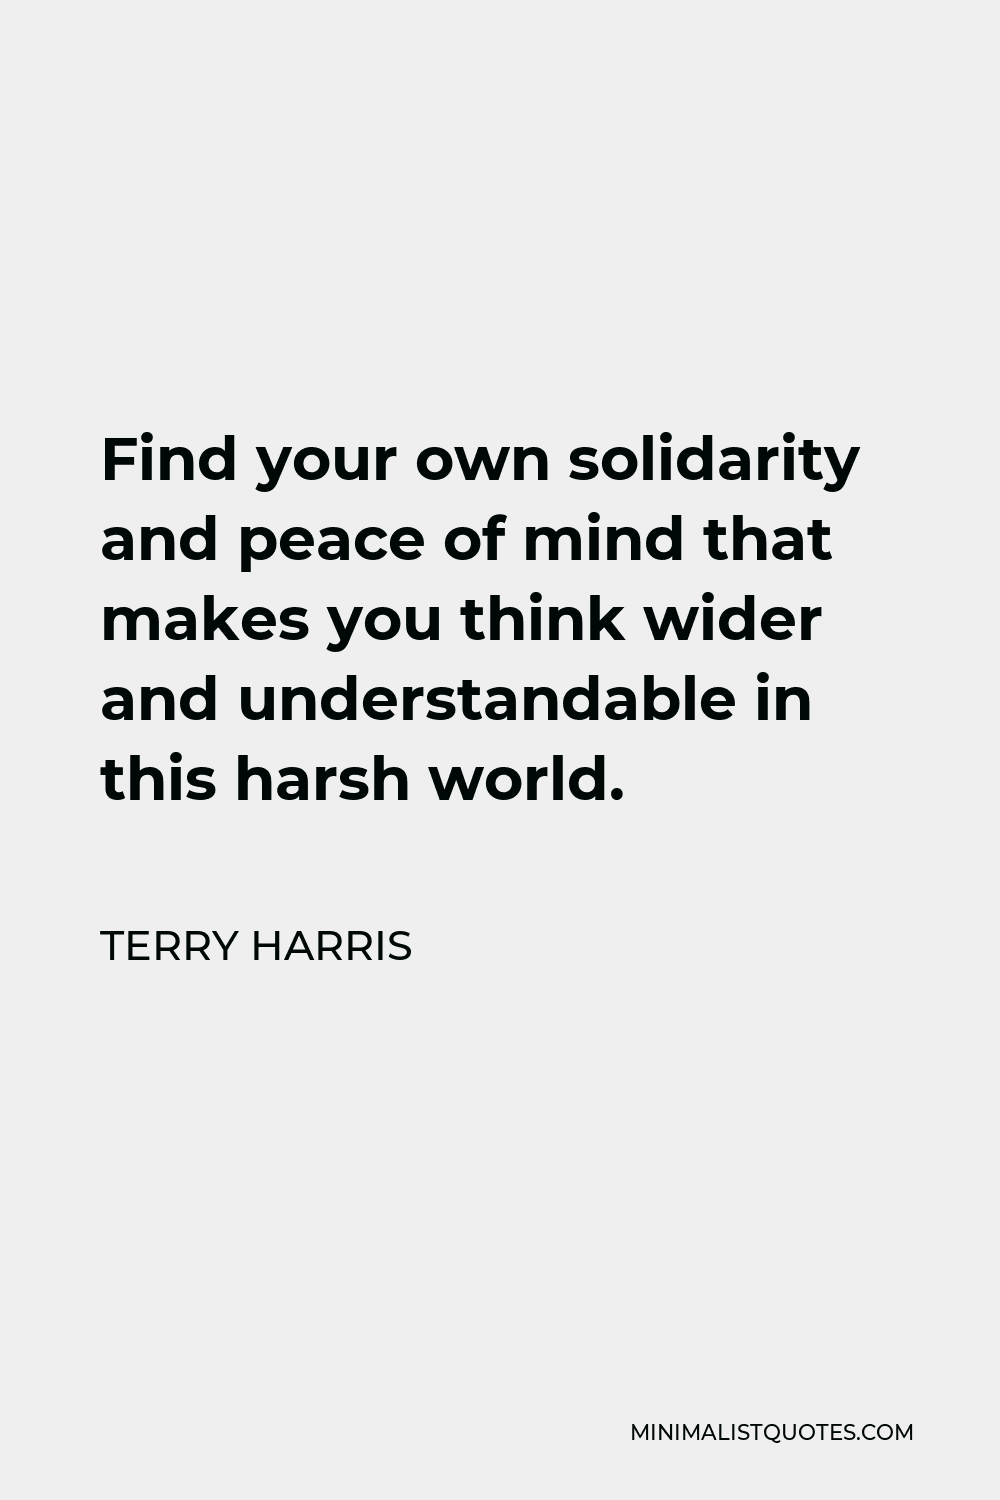 Terry Harris Quote - Find your own solidarity and peace of mind that makes you think wider and understandable in this harsh world.  